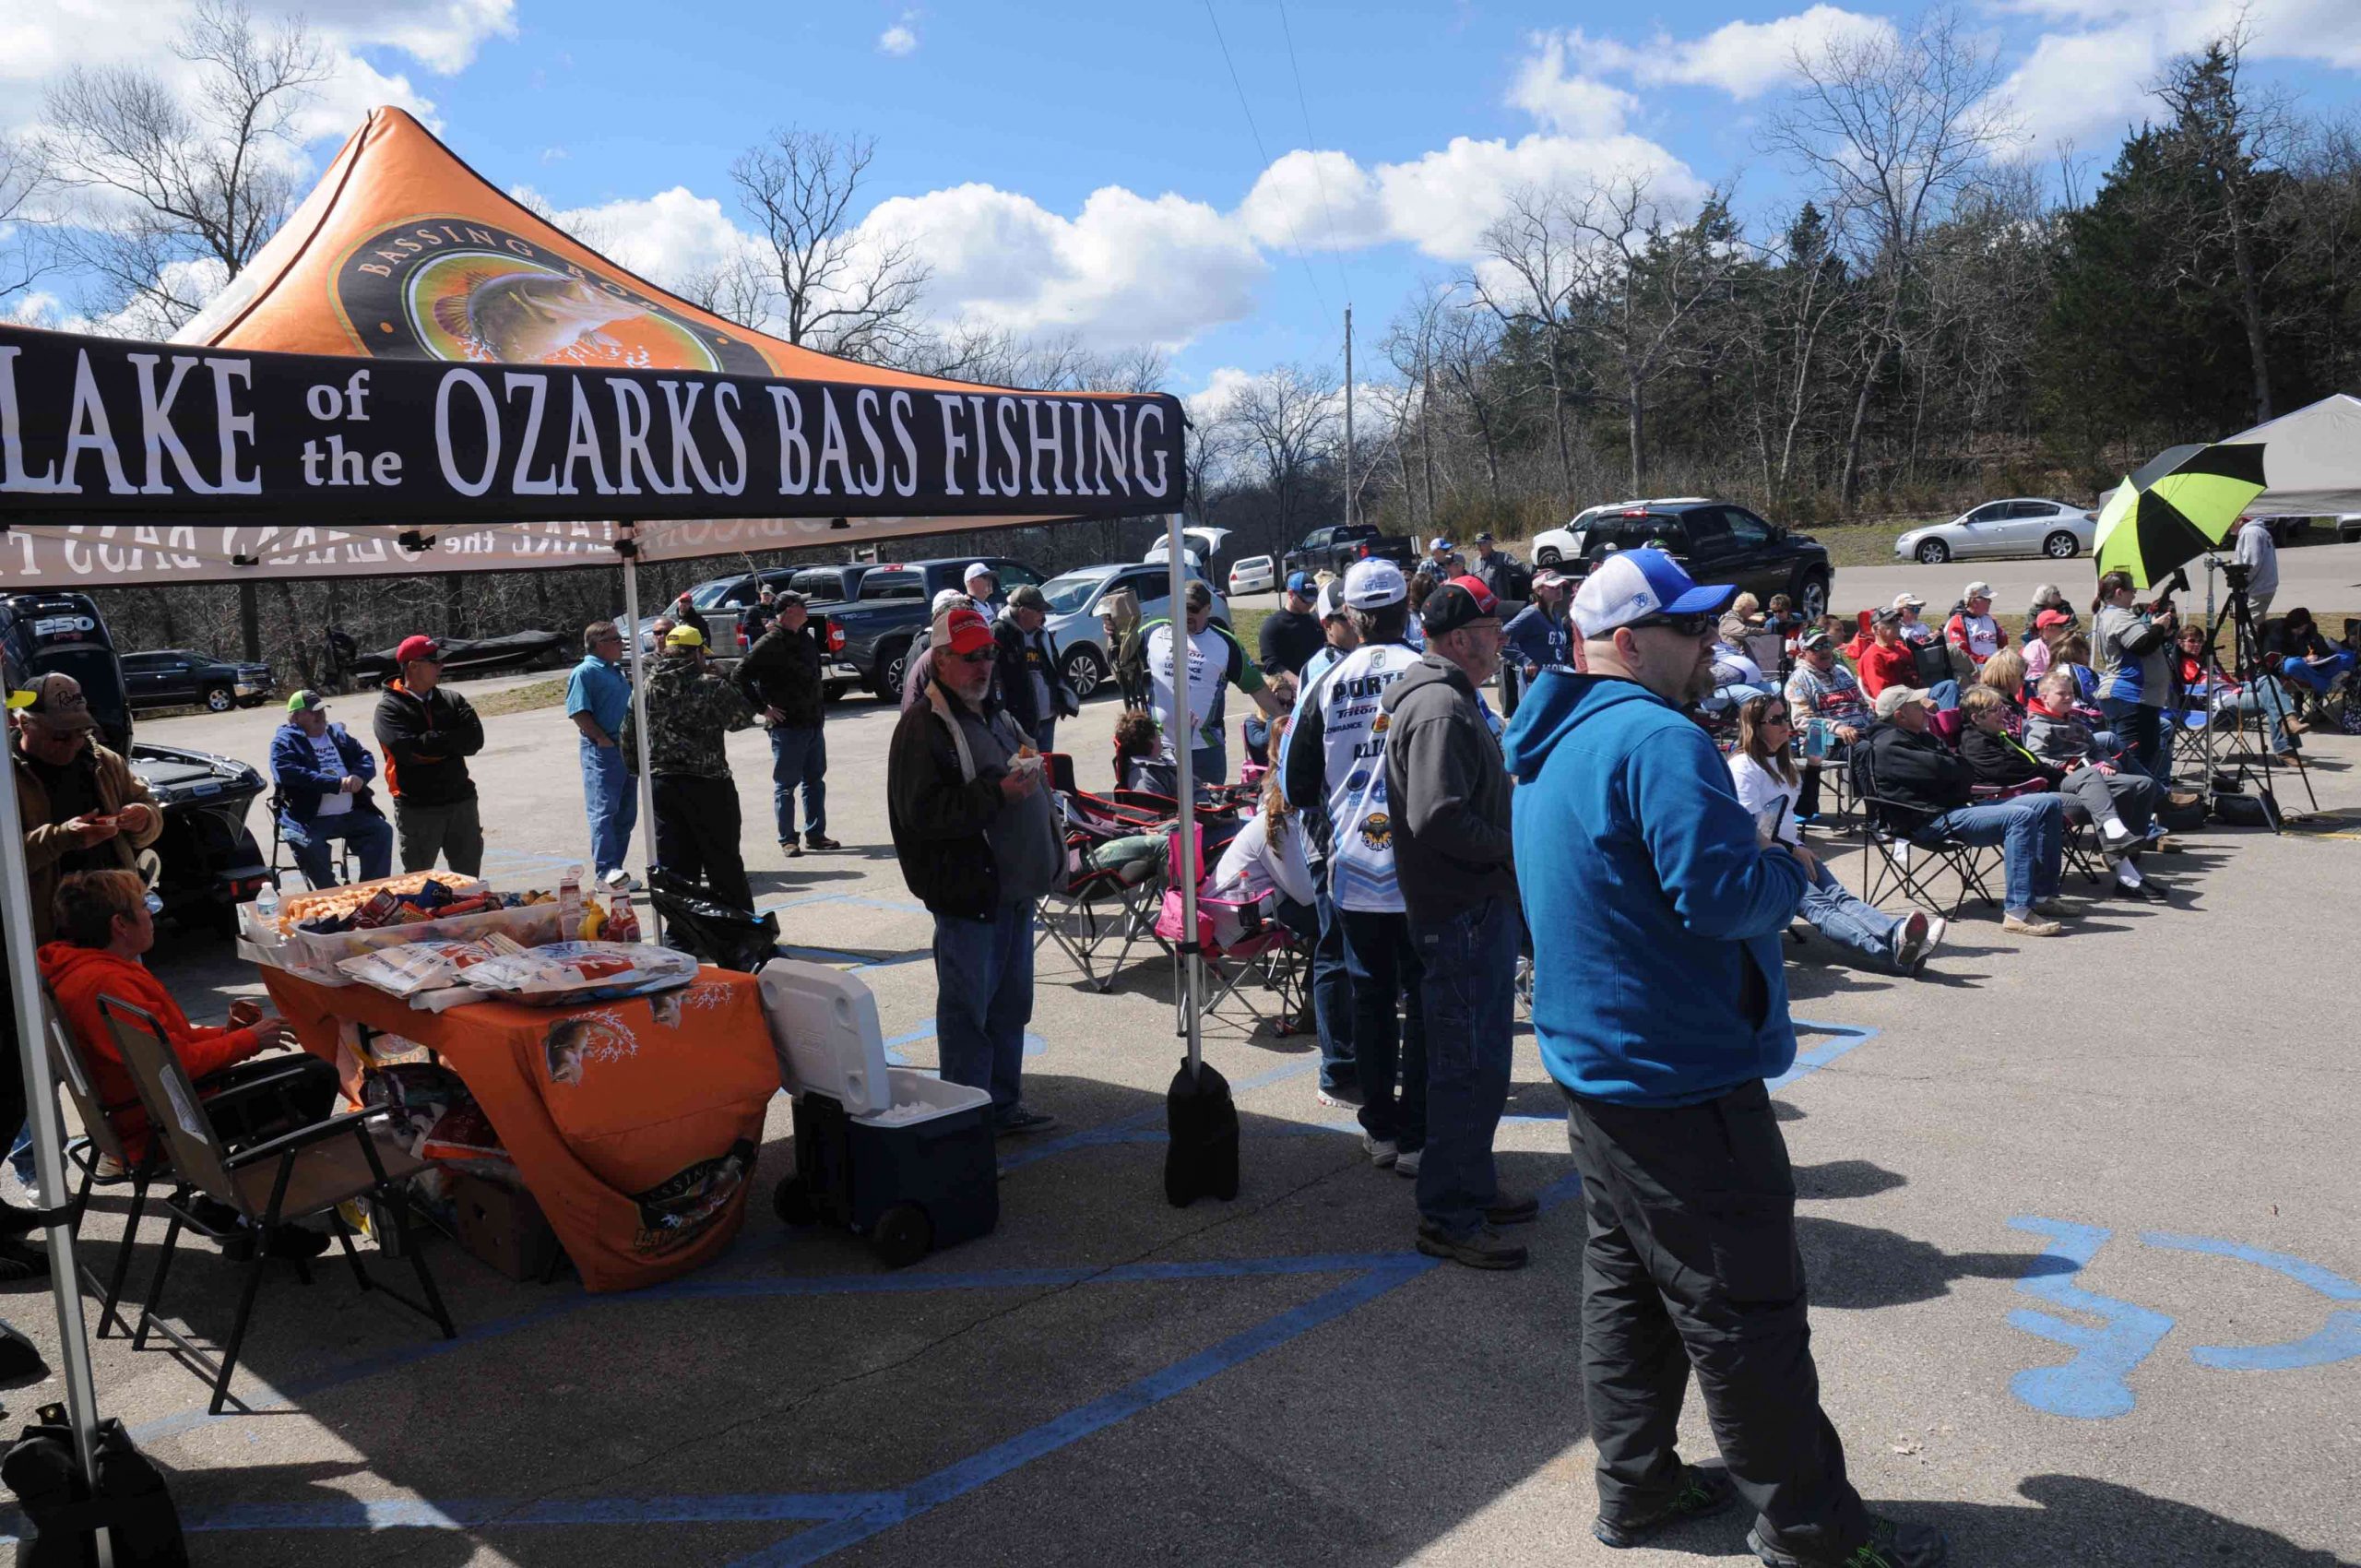 The weather improved from Day 1 to Day 2 for the weigh-in crowd at the 2017 Academy Sports + Outdoors B.A.S.S. Nation Central Regional presented by Magellan Outdoors.